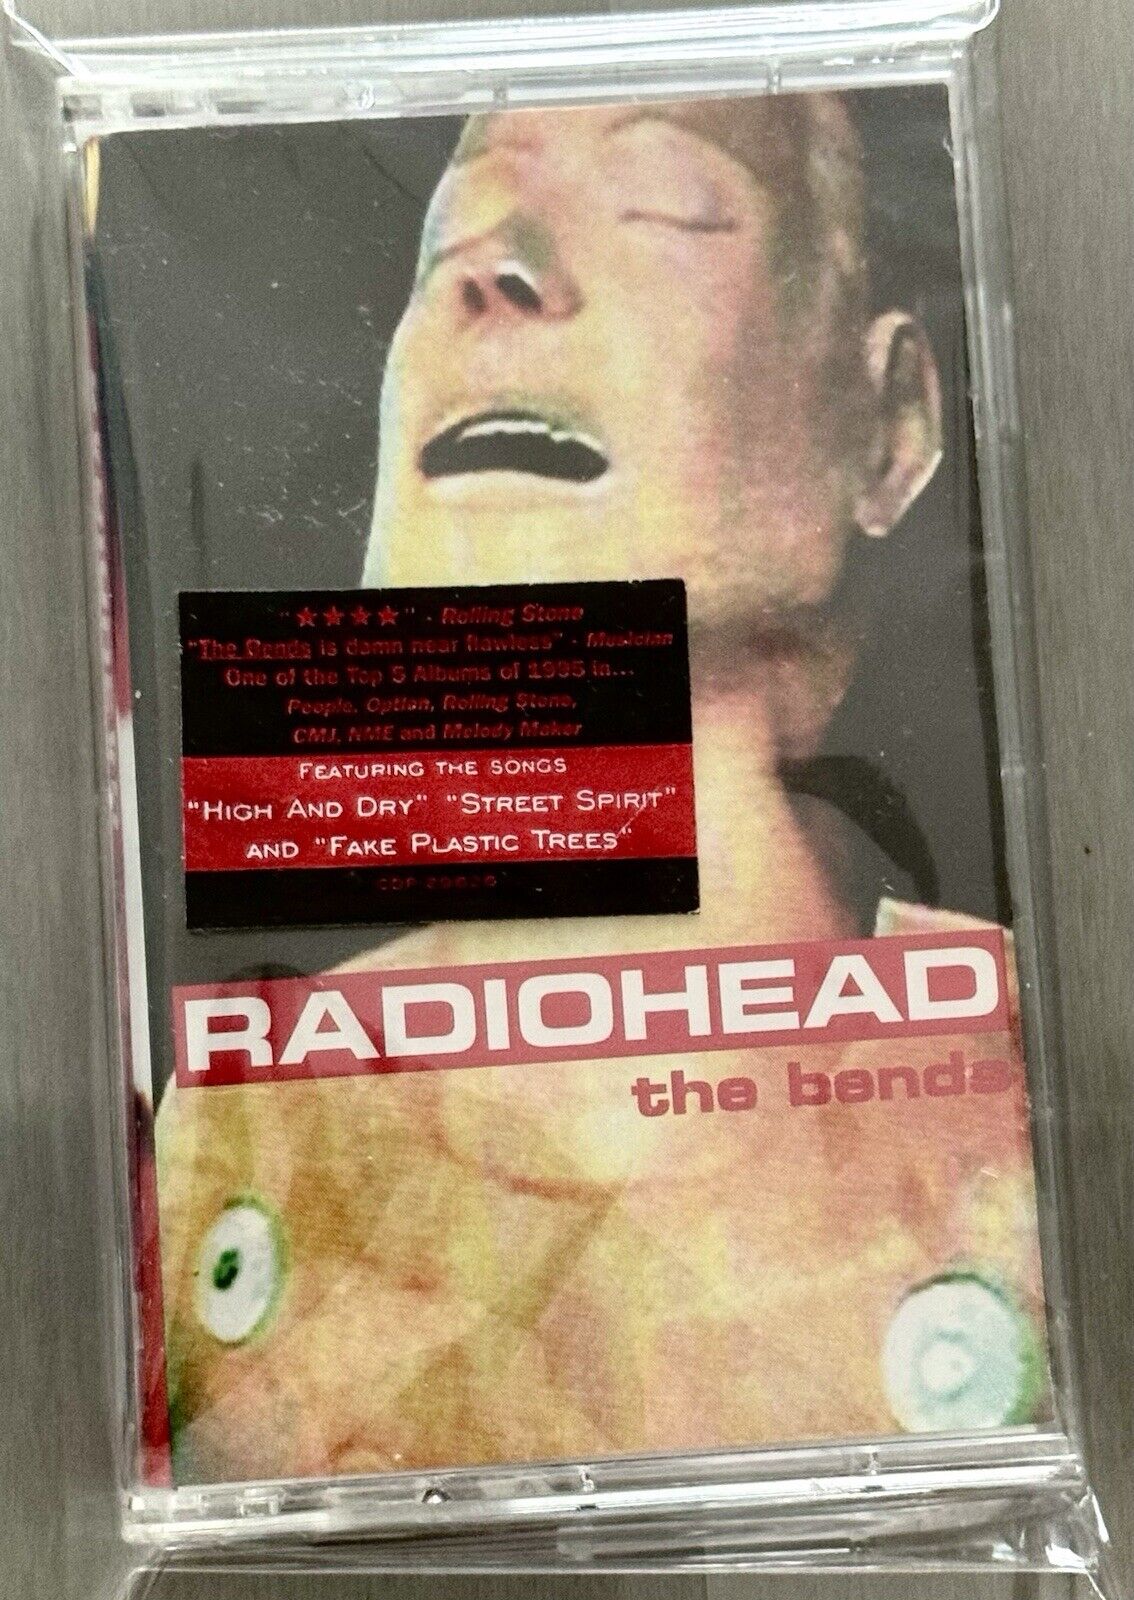 RADIOHEAD THE BENDS Cassette ©1995 CAPITOL EMI (like IGS) OOP NOS HYPE RARE